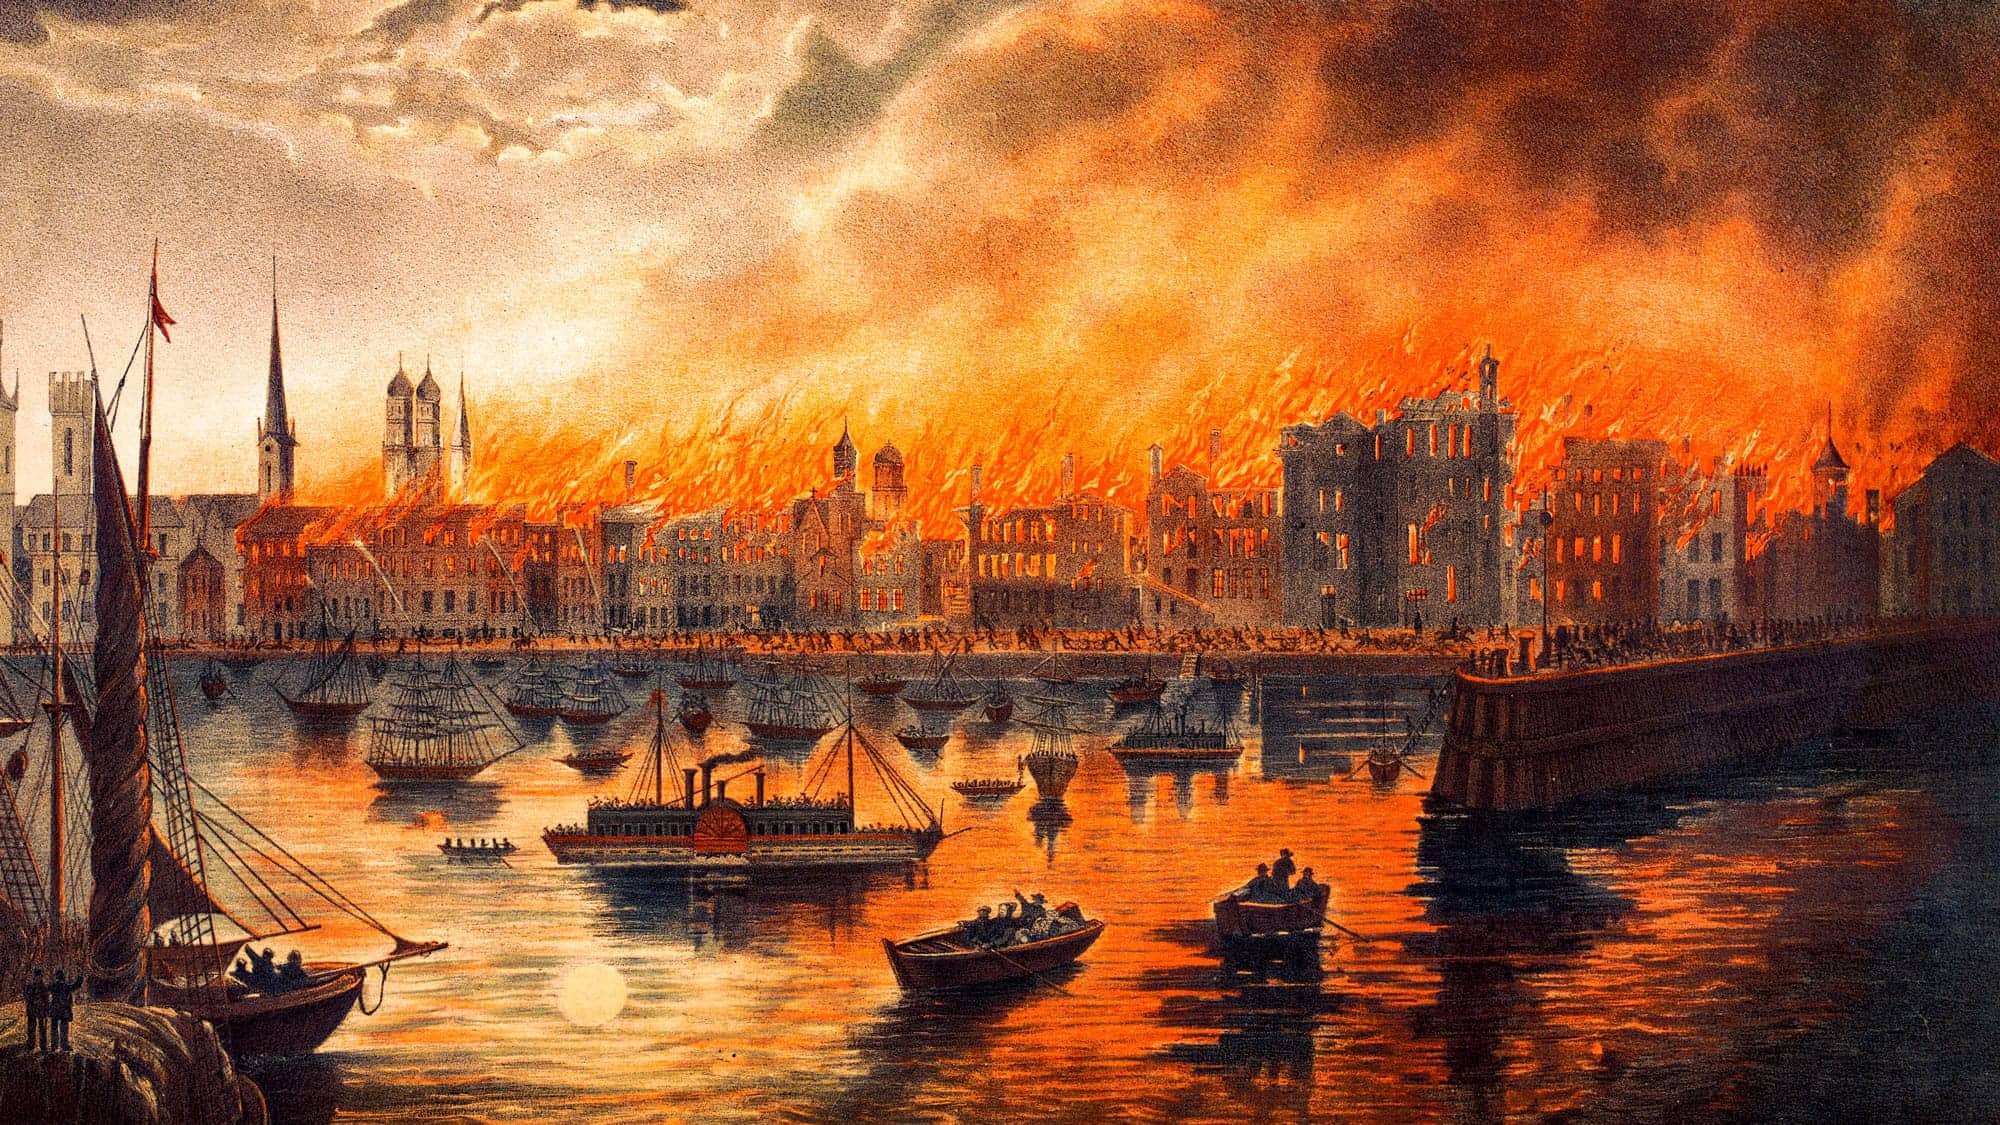 Illustration of The Great Chicago Fire